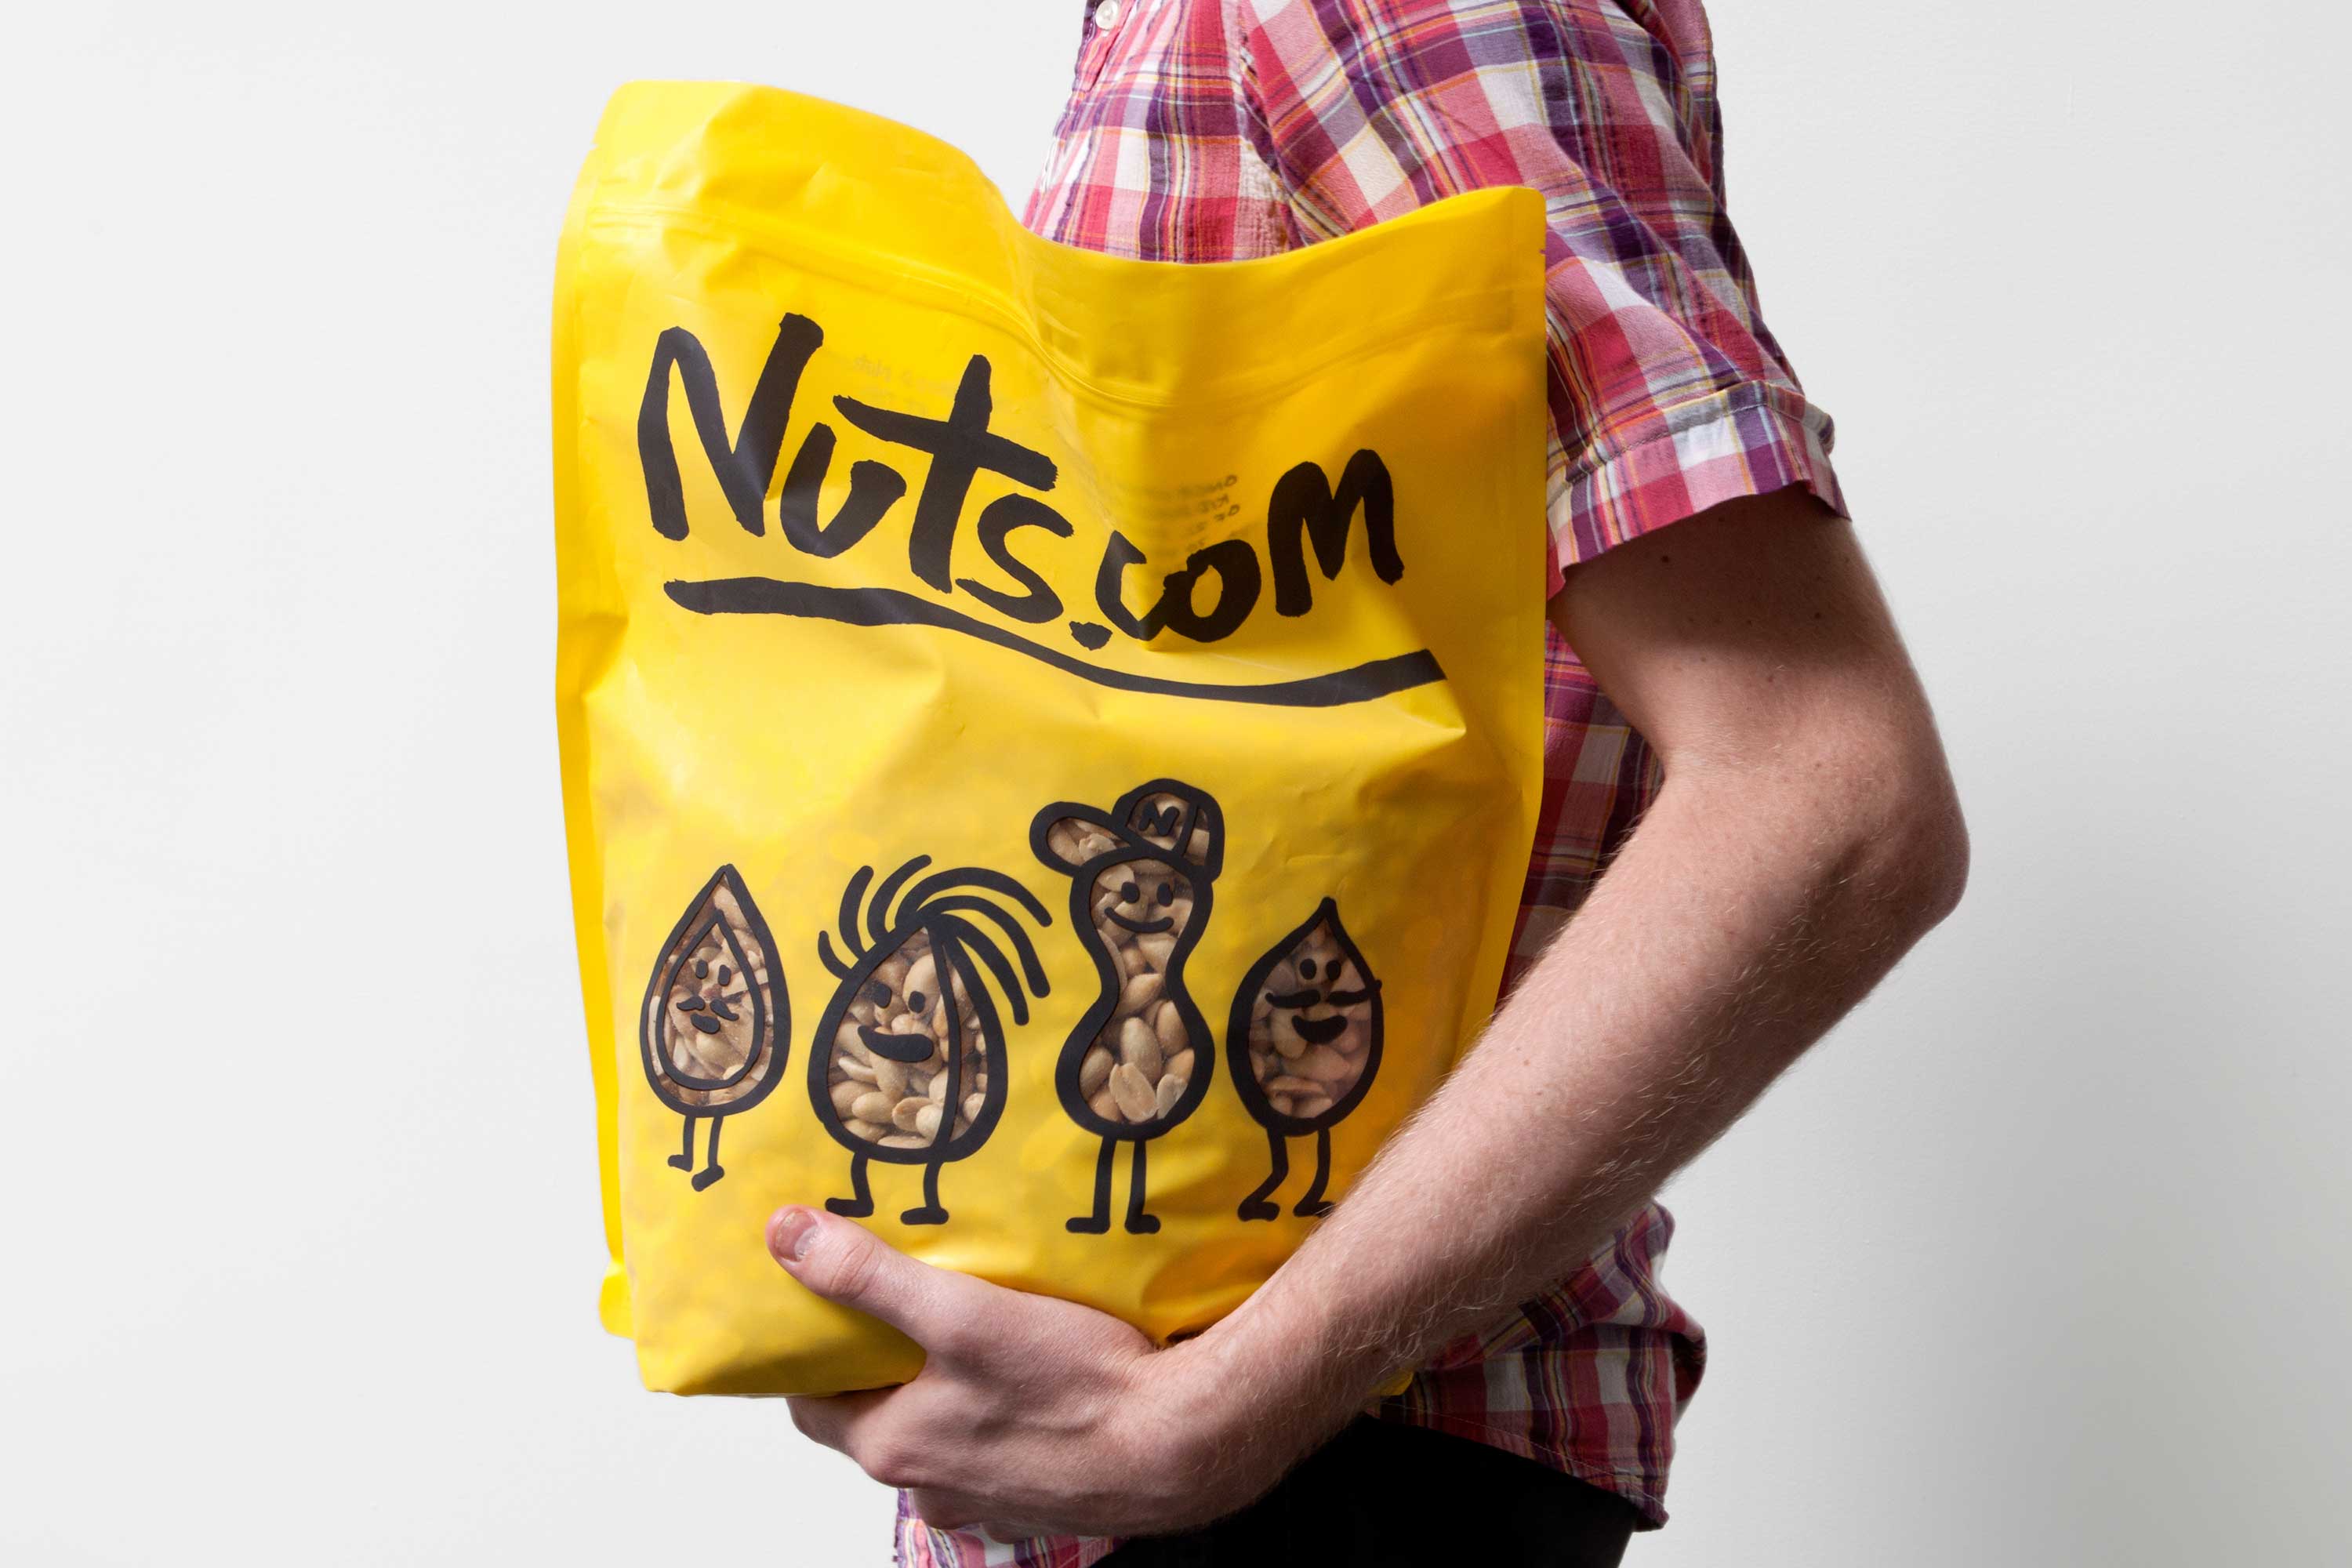 New packaging with illustrated character detail designed by Pentagram for nut, snack, tea and coffee brand Nuts.com